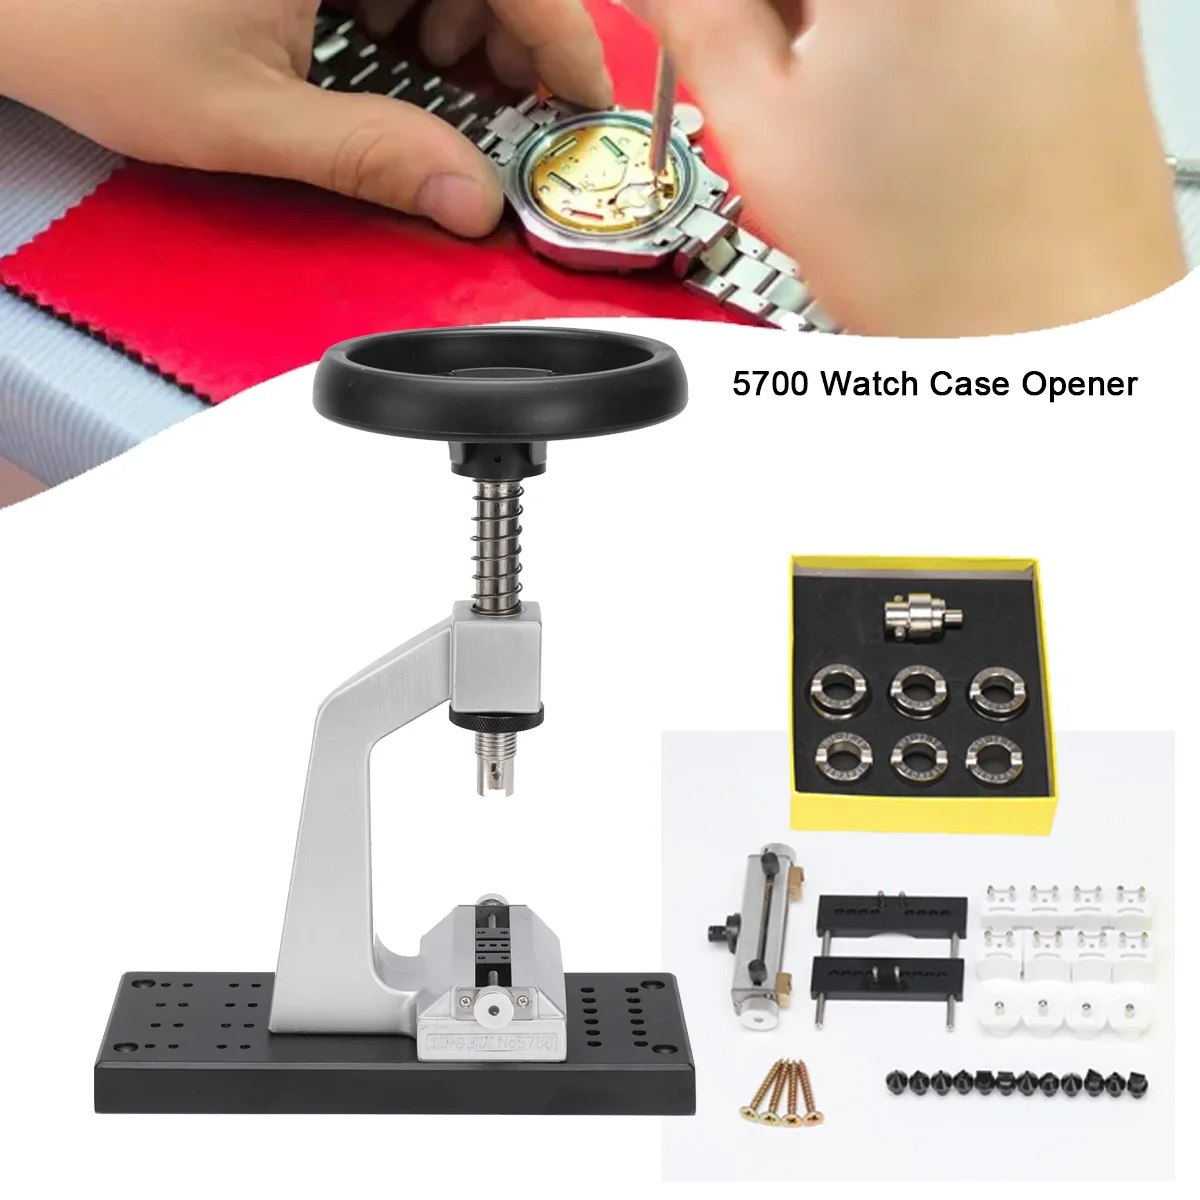 

5700 Bench Watch Case Opener For Screw Oyster Style Watch Case Opener And Closer Suit For WatchMaking and Repair